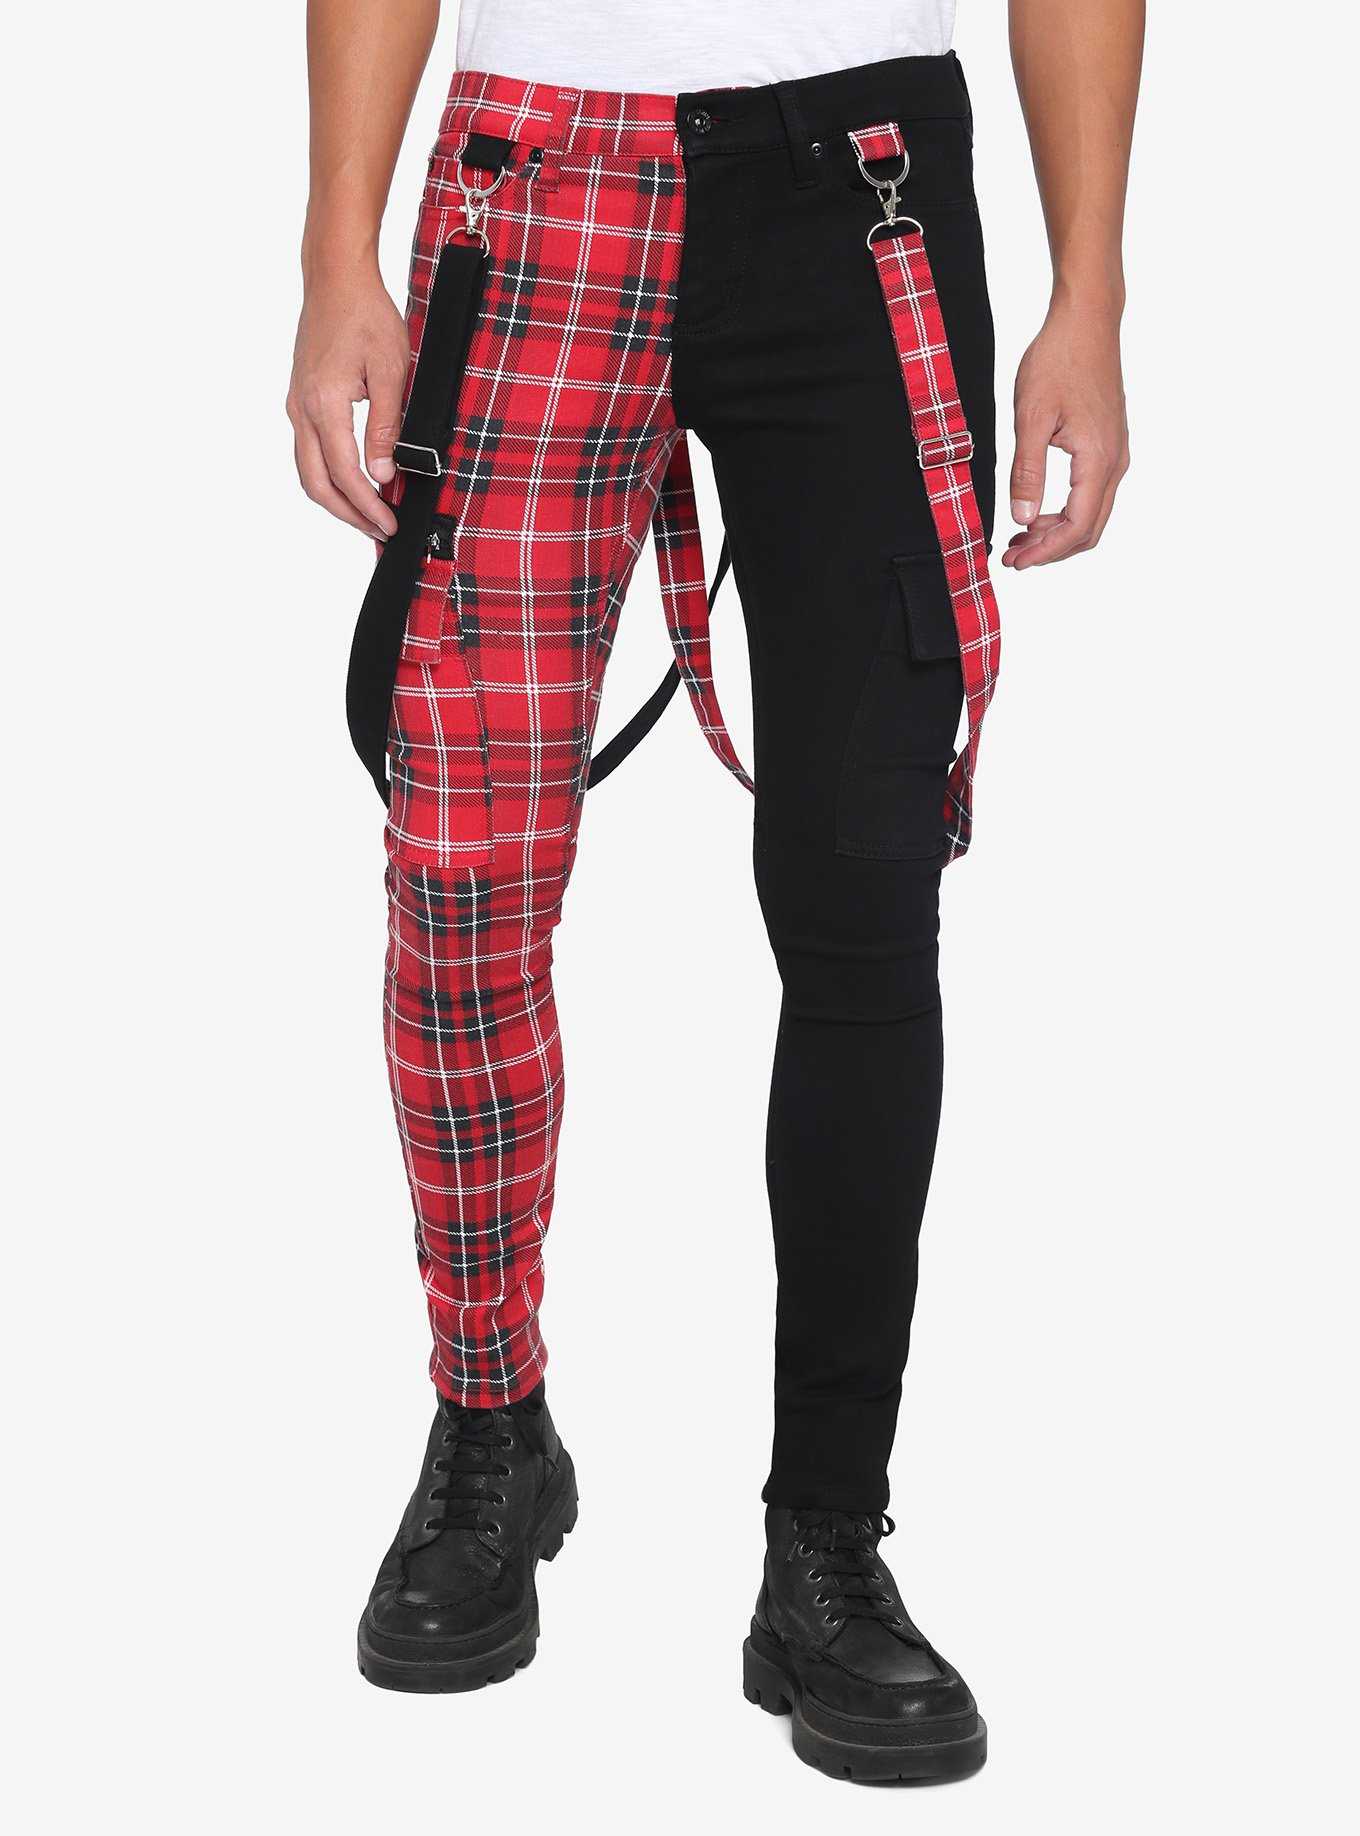 Hot Topic, Pants & Jumpsuits, Hot Topic Grey Plaid Pants With Chain